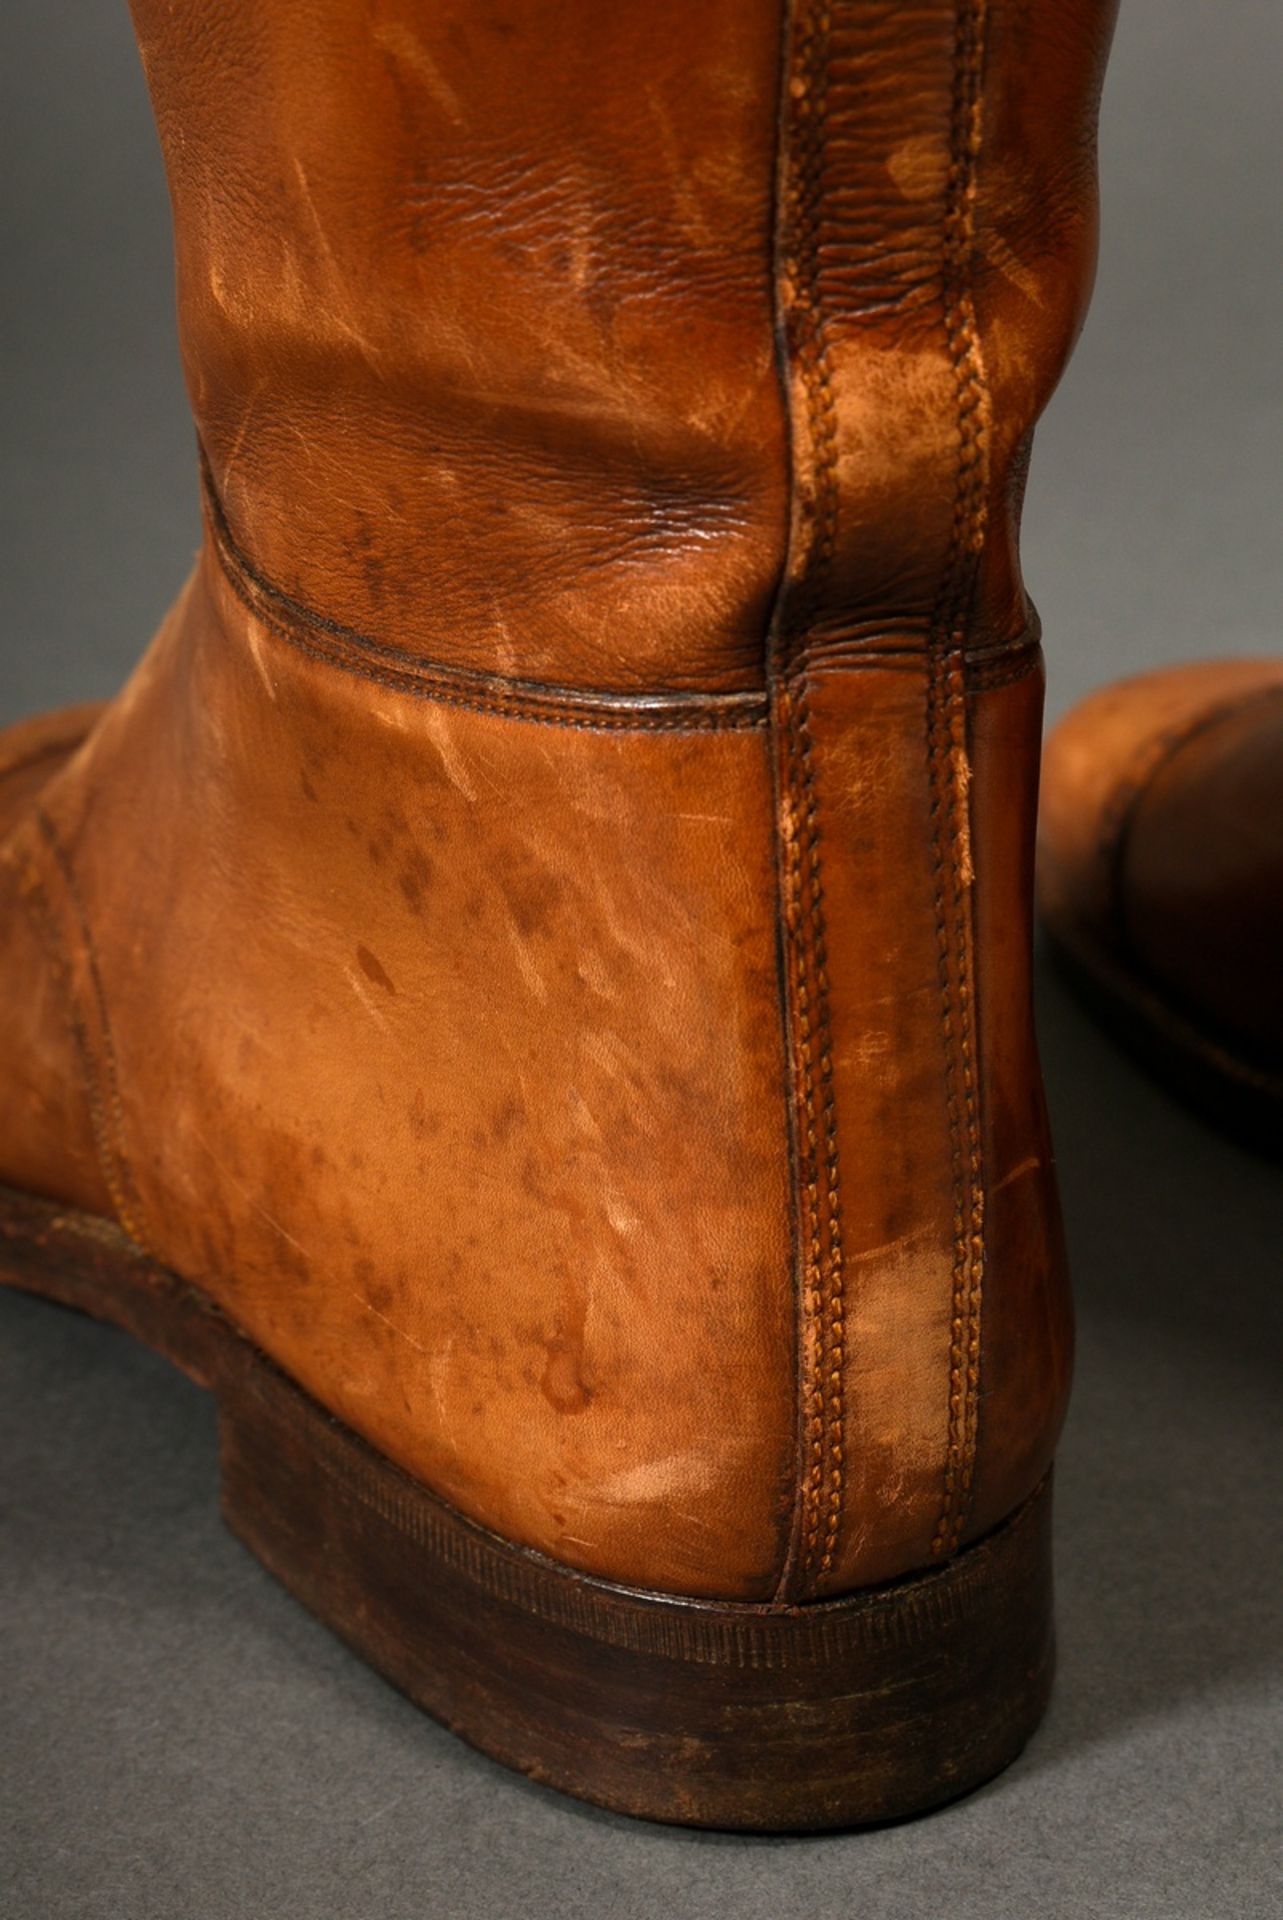 Pair of Edwardian polo boots "James Moore" with lacing and hole pattern, with inserted boot stretch - Image 7 of 8